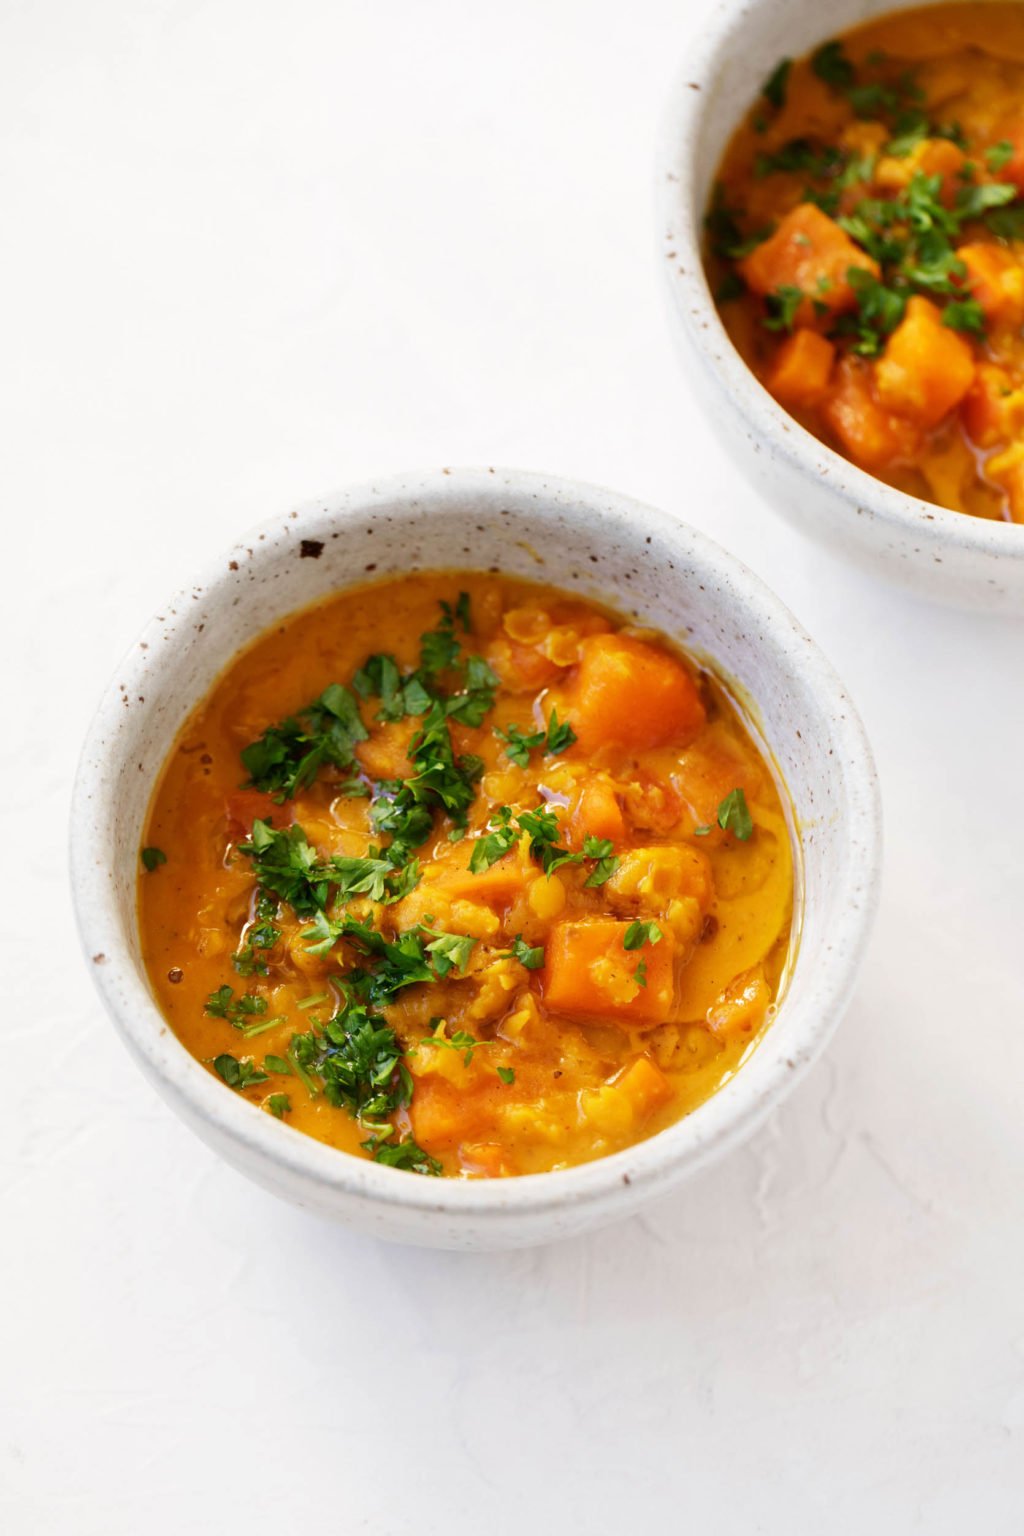 Two small, gray bowls have been filled with a plant-based, soupy dish of curried sweet potato lentils. Each bowl is garnished with chopped, fresh herbs.